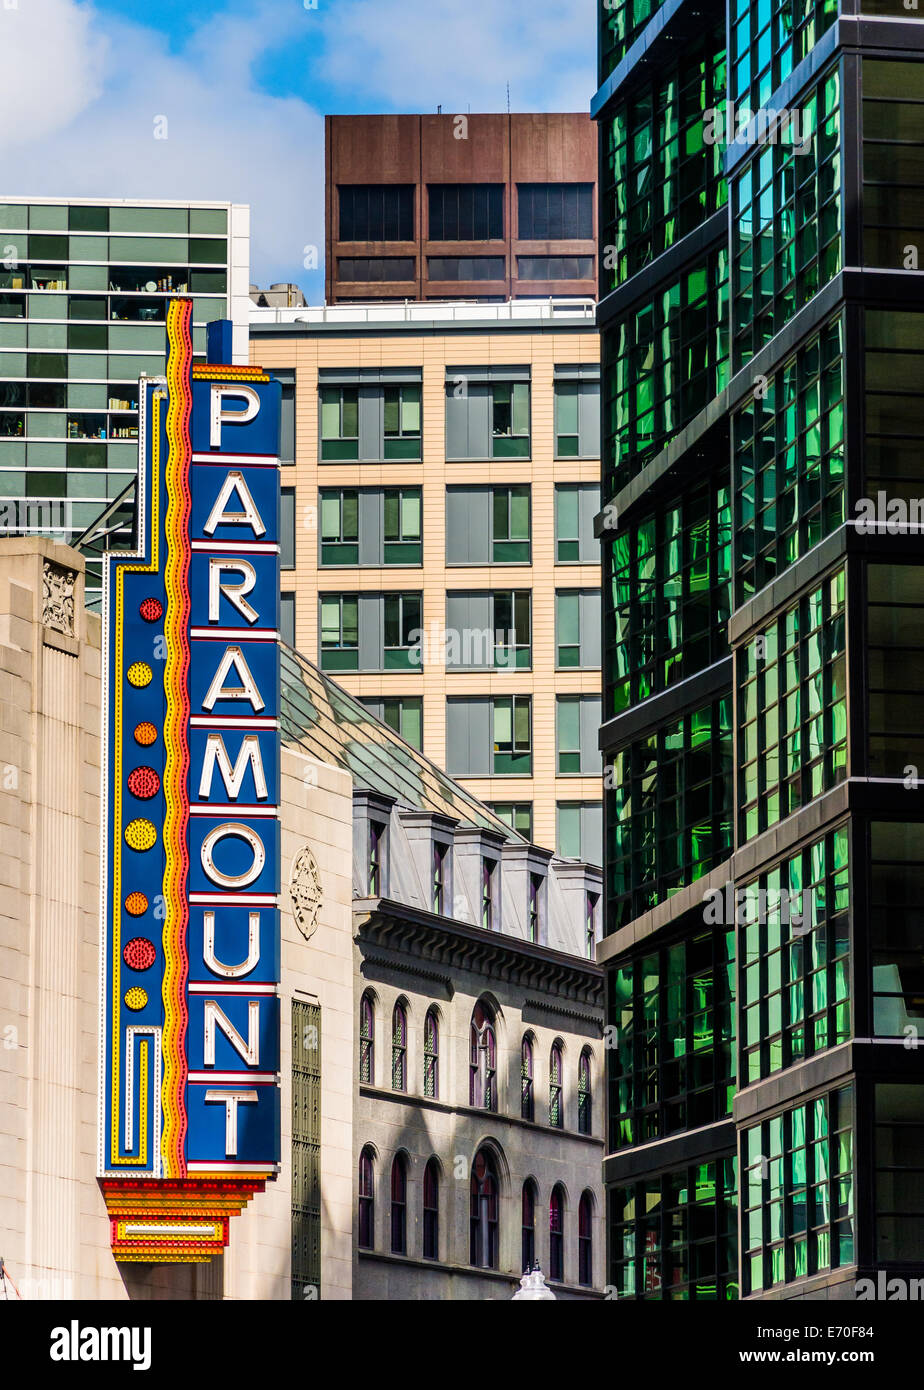 Paramount sign, and buildings in downtown Boston, Massachusetts. Stock Photo